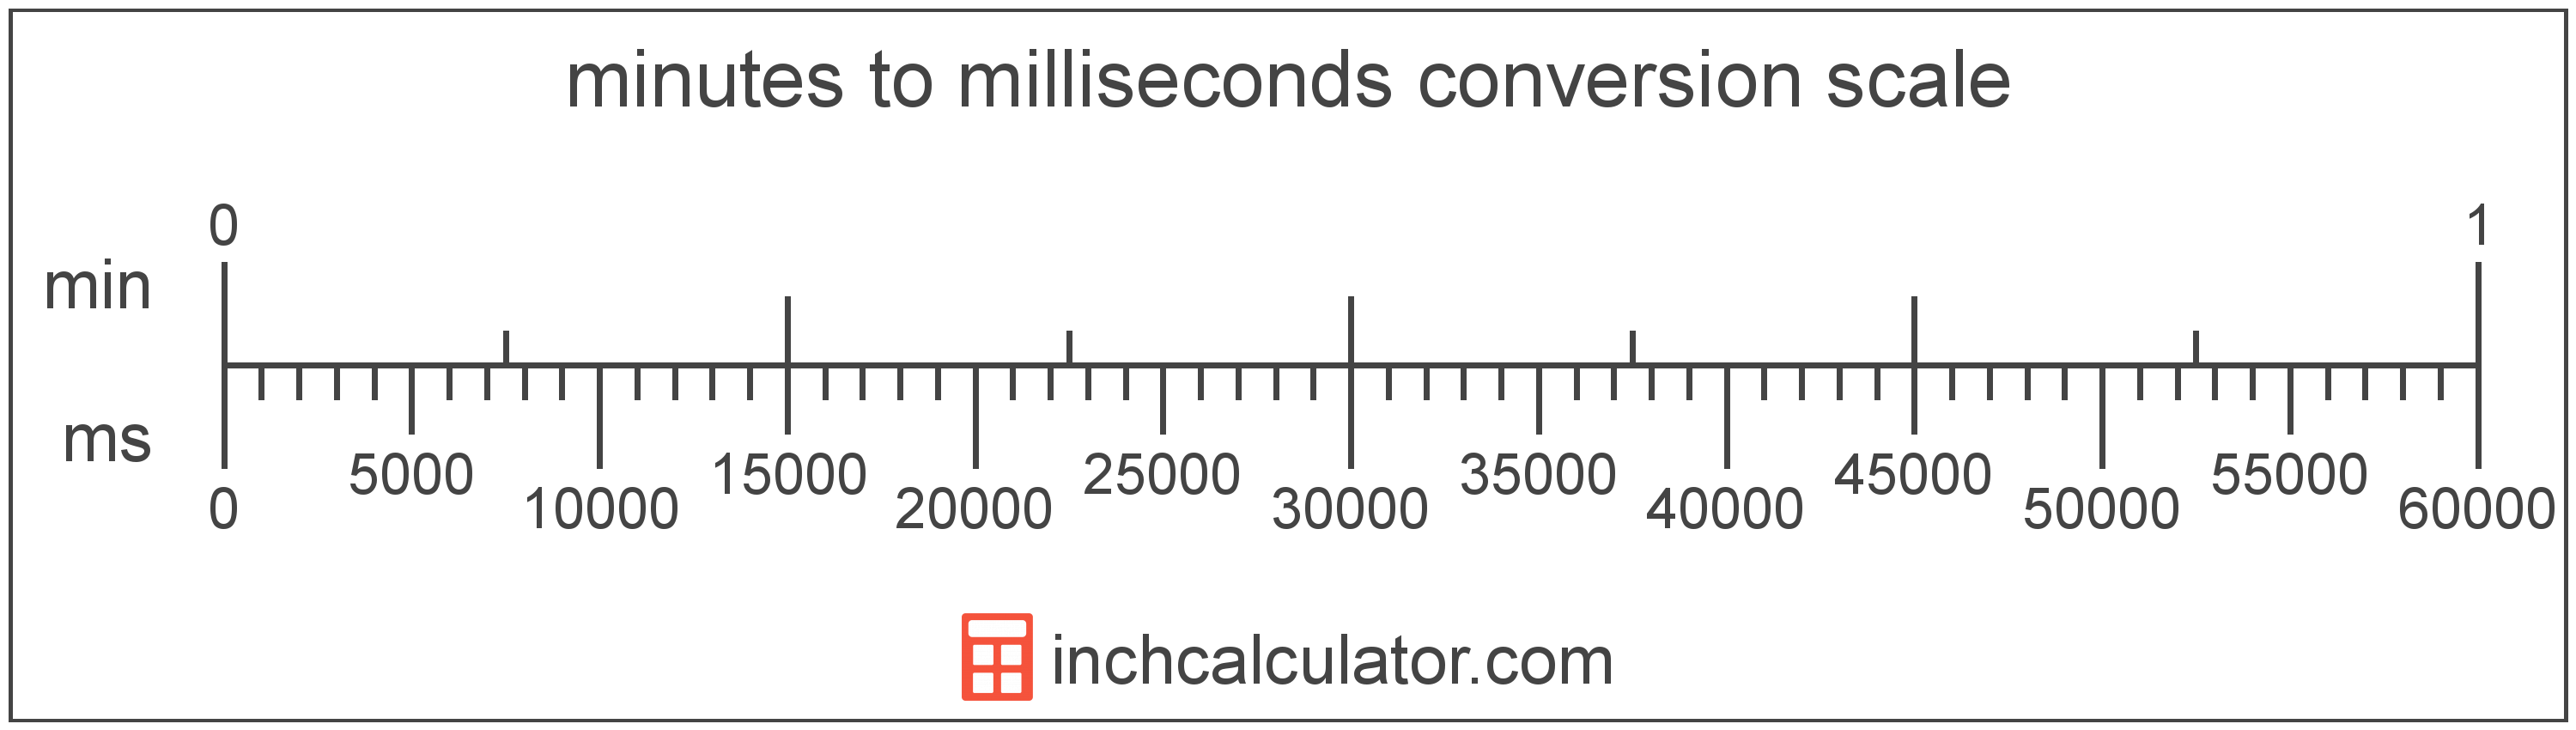 conversion scale showing milliseconds and equivalent minutes time values